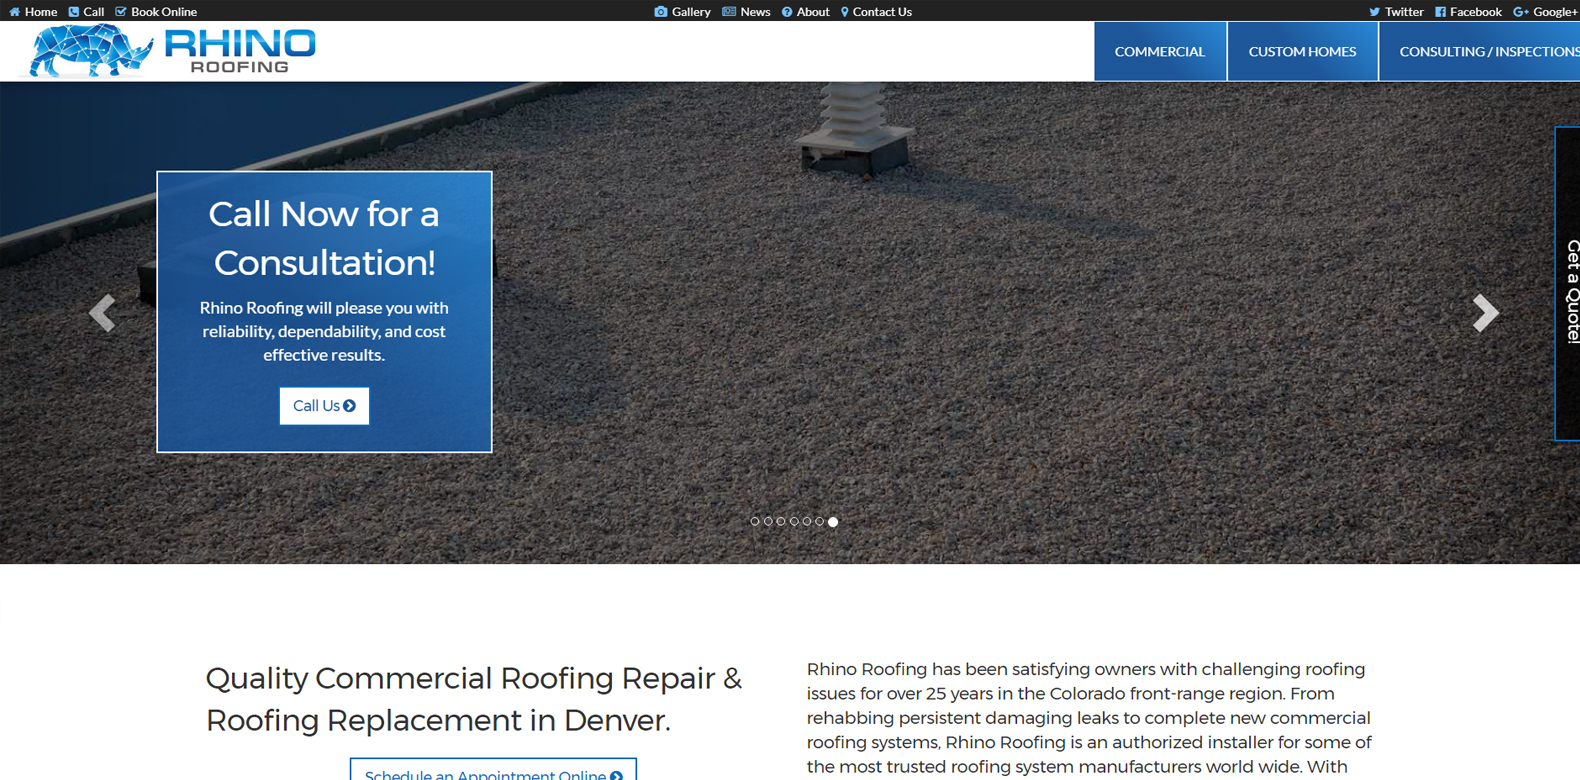 
New Website Launch: Rhino Roofing